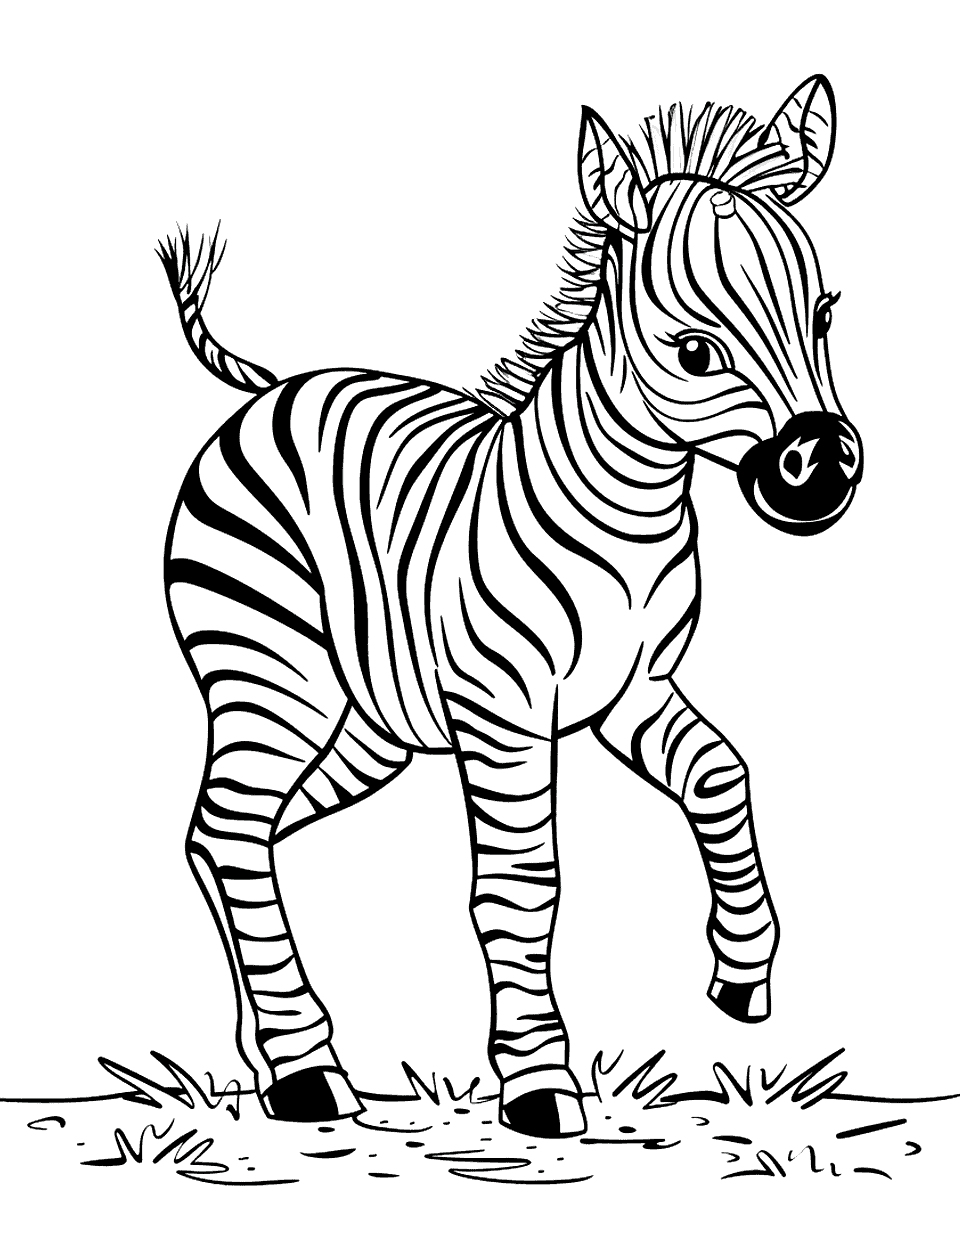 Playful Baby Zebra Coloring Page - A baby zebra kicking up its heels and frolicking in the savanna.